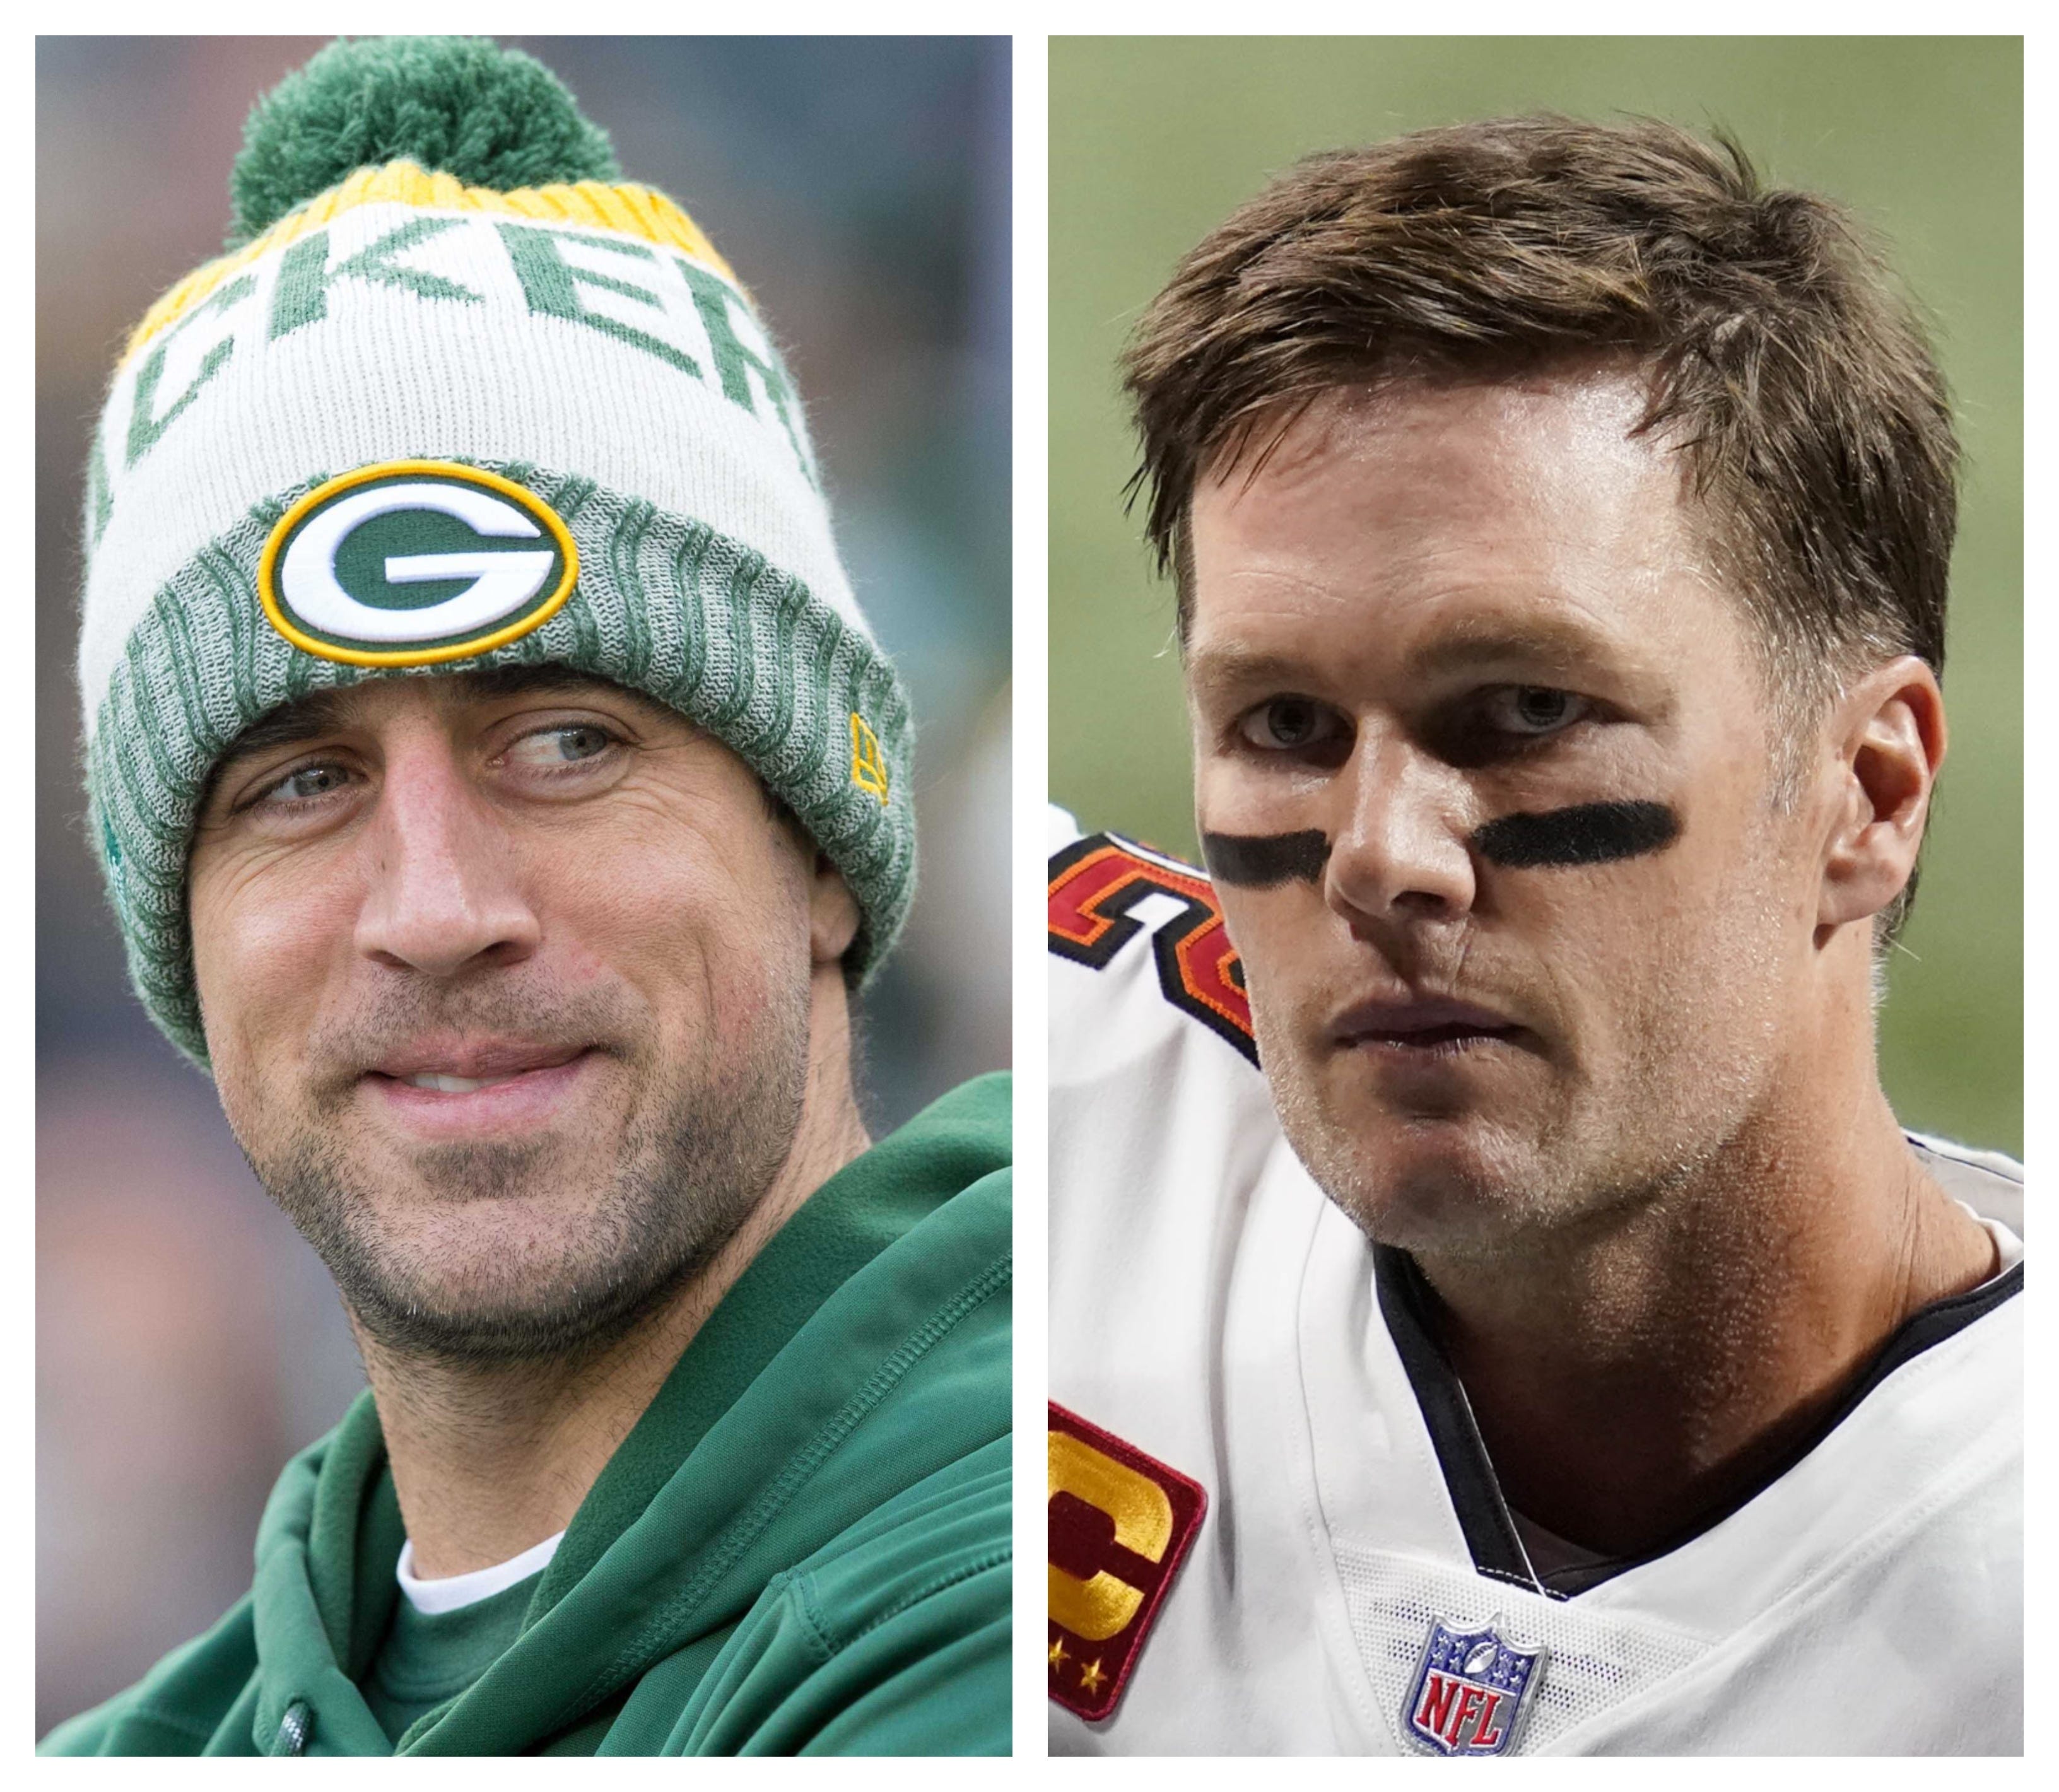 Aaron Rodgers and Tom Brady are inaugural inductees into the California High School Football Hall of Fame at The Rose Bowl.